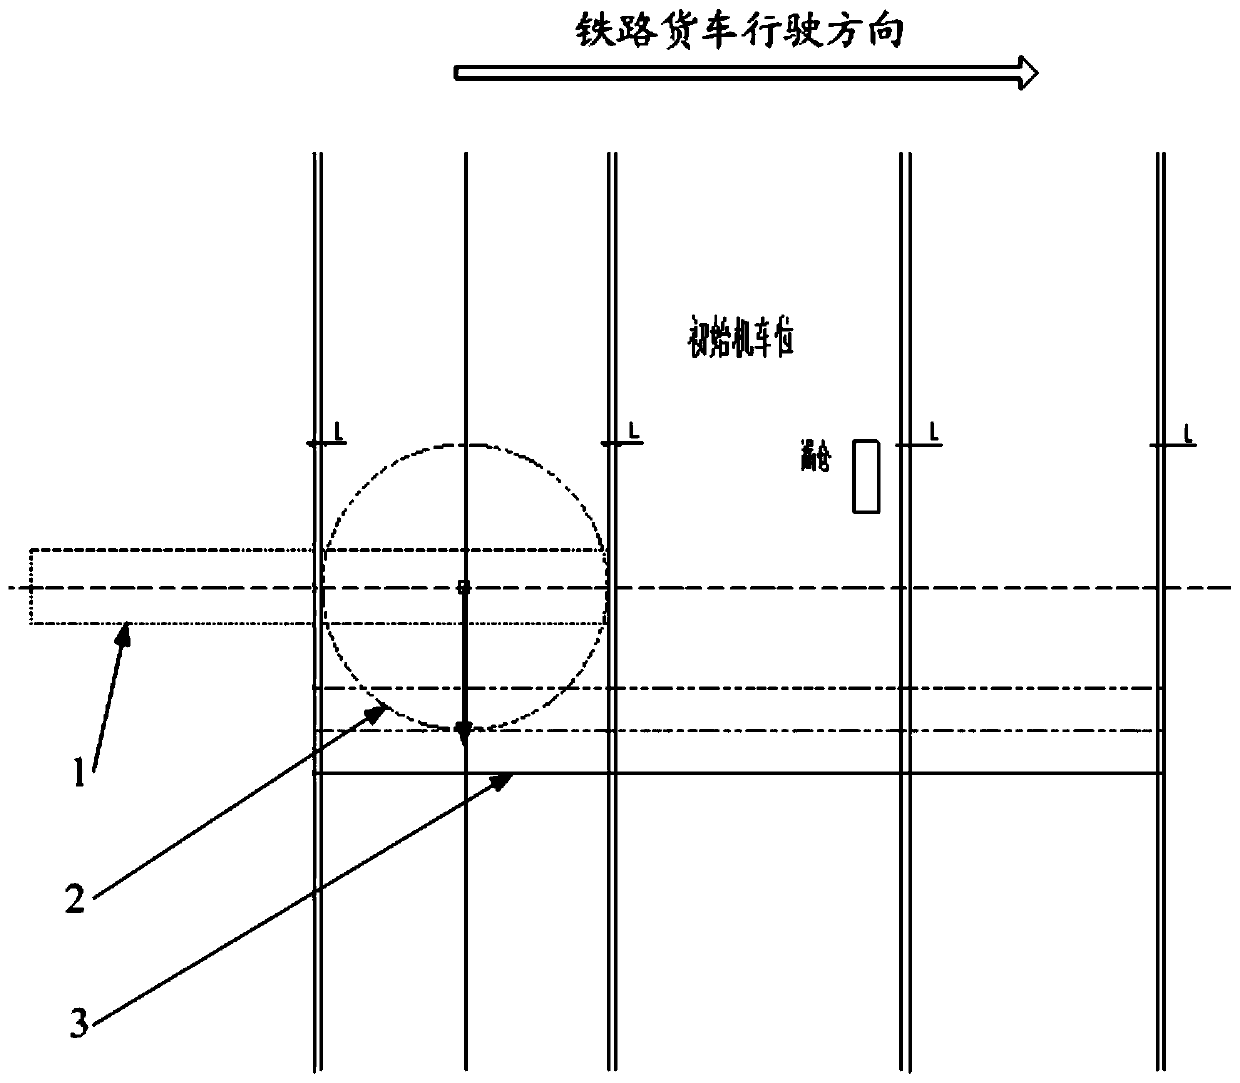 A roof opening and closing method and roof opening and closing system of a railway freight car